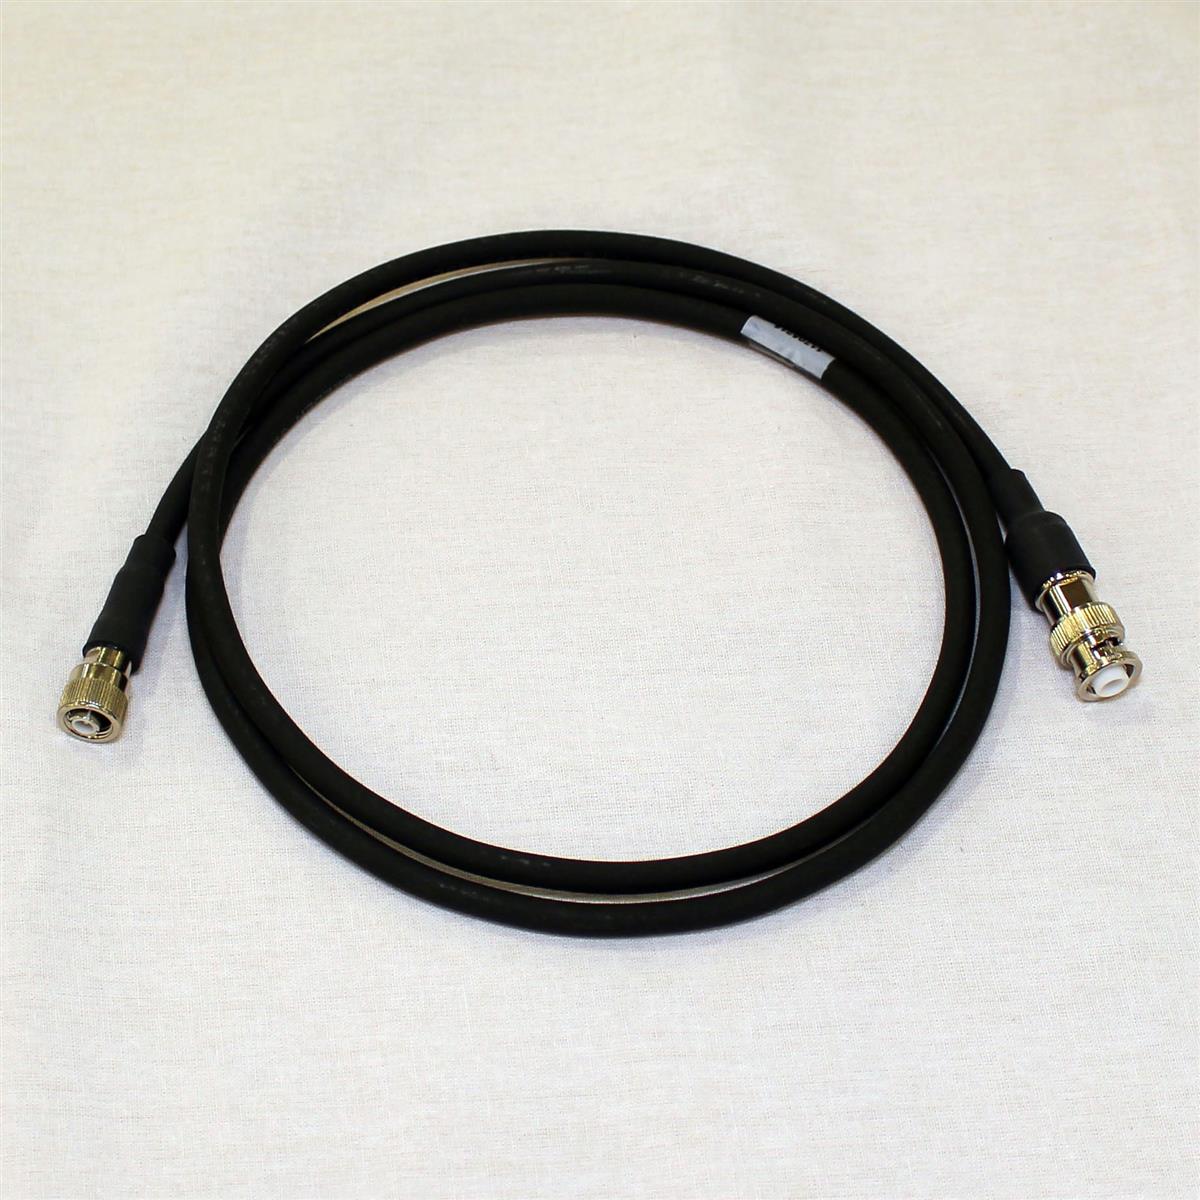 Cable for MHV to MHV, 60 inches long.